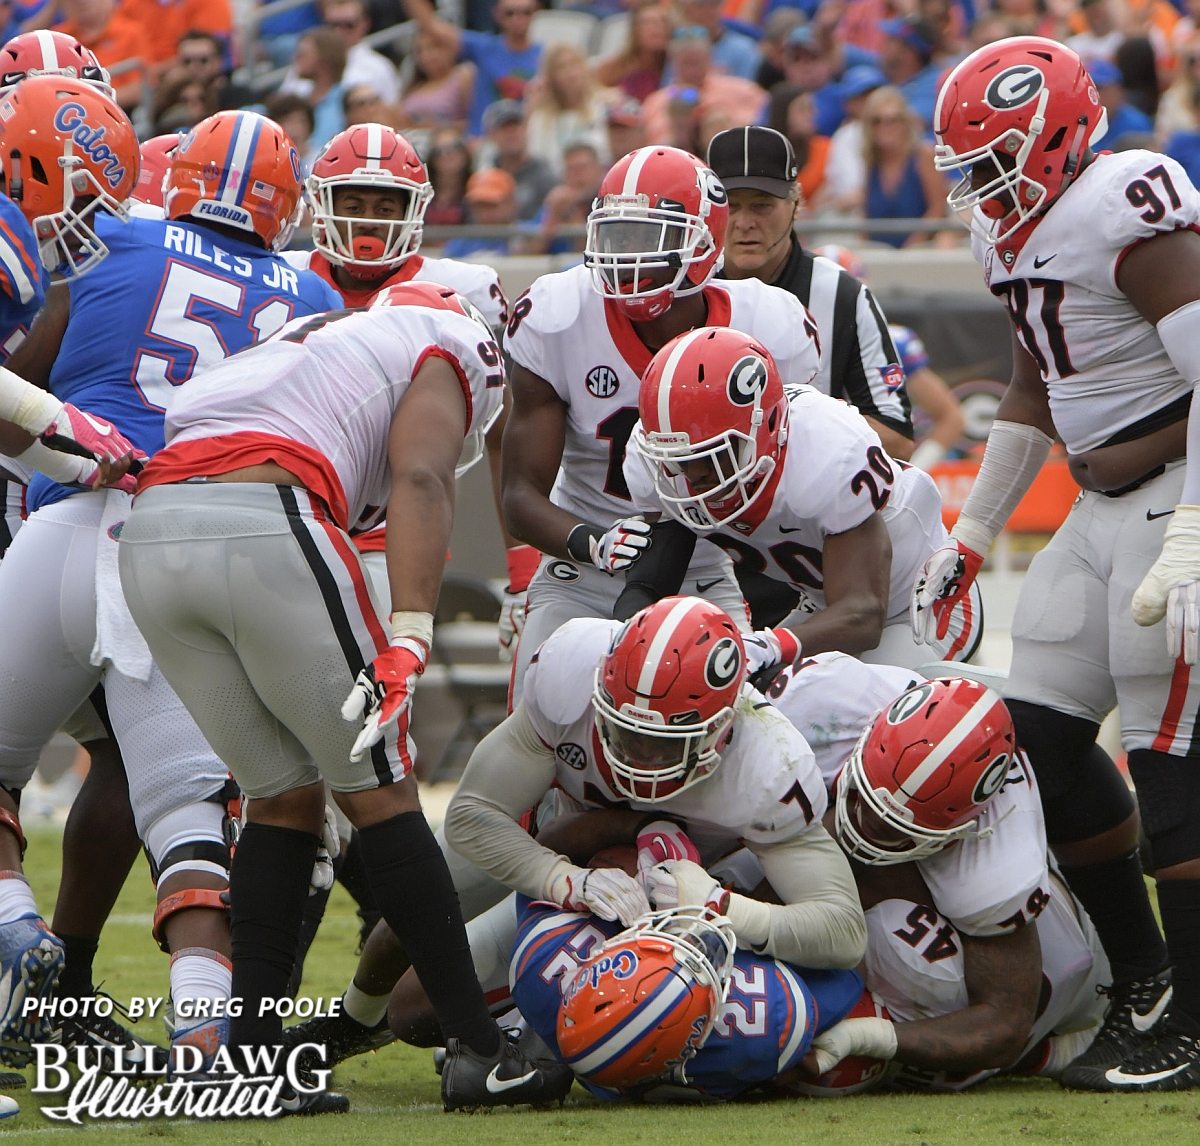 The Bulldog D was stout versus the Gators' offense on Saturday in Georgia's 42-7 win over Florida in Jacksonville